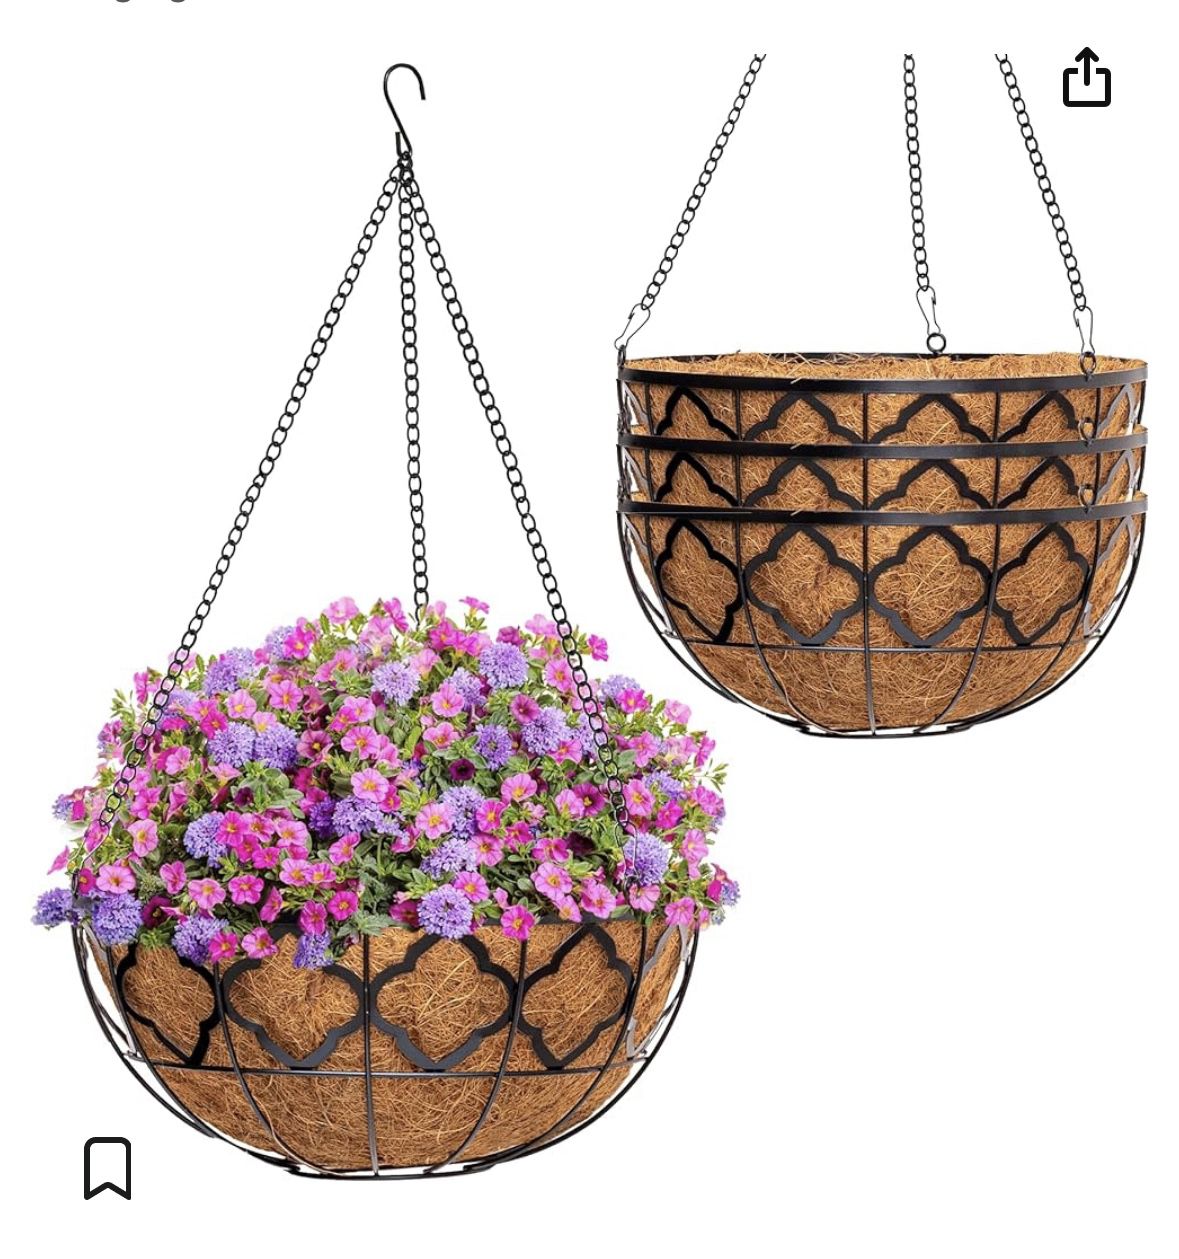 Y&M 4 Packs 16 Inch Hanging Planter Basket with Coco Liner, 16" Metal Round Wire Plant Holder with Chain for Porch Decor Planter Pot Hanger Garden Ind